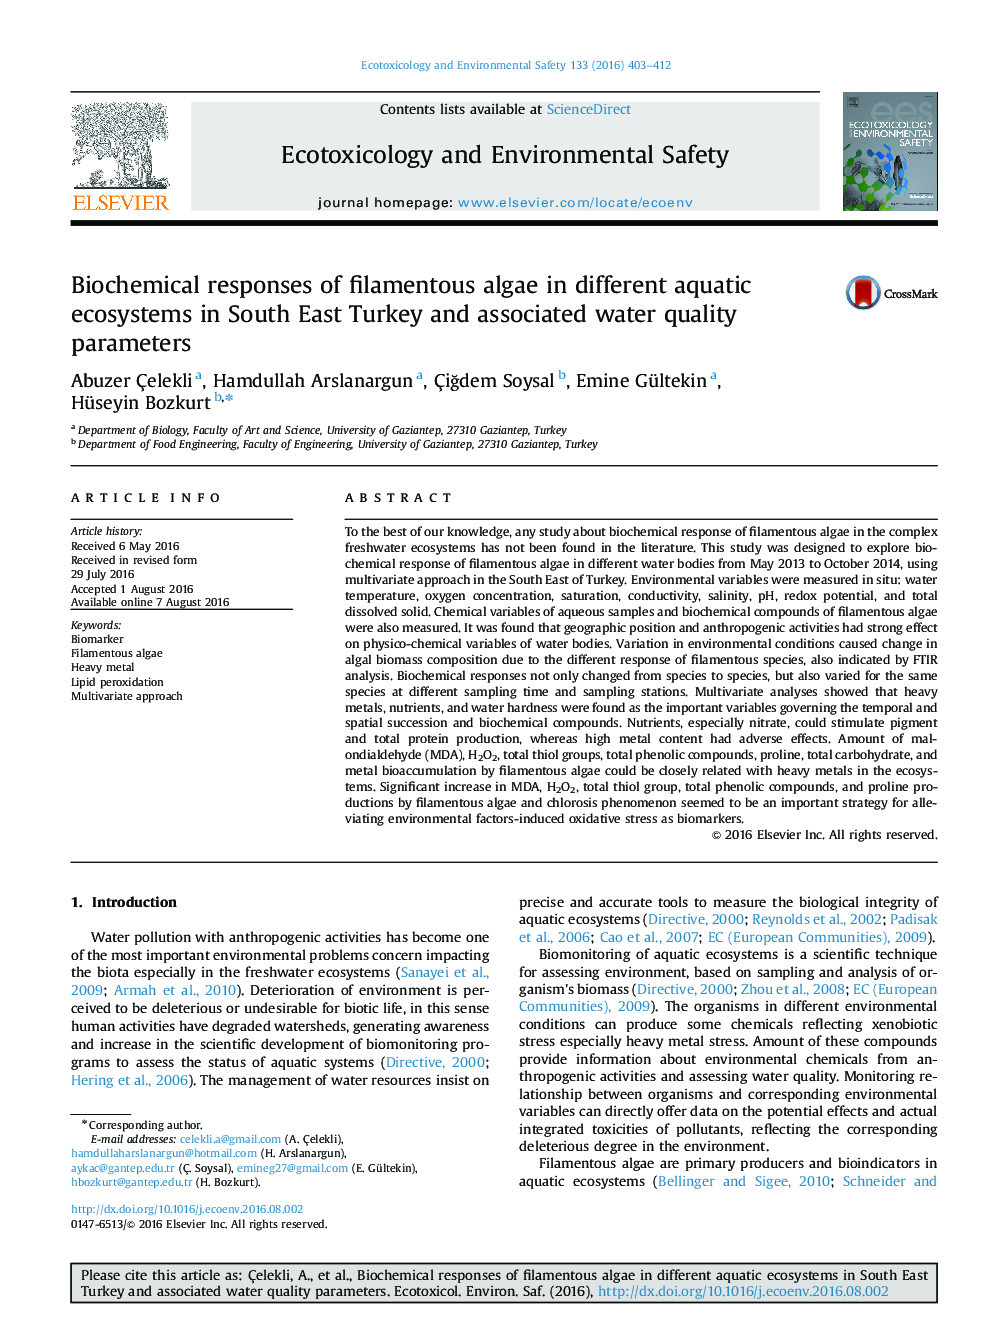 Biochemical responses of filamentous algae in different aquatic ecosystems in South East Turkey and associated water quality parameters